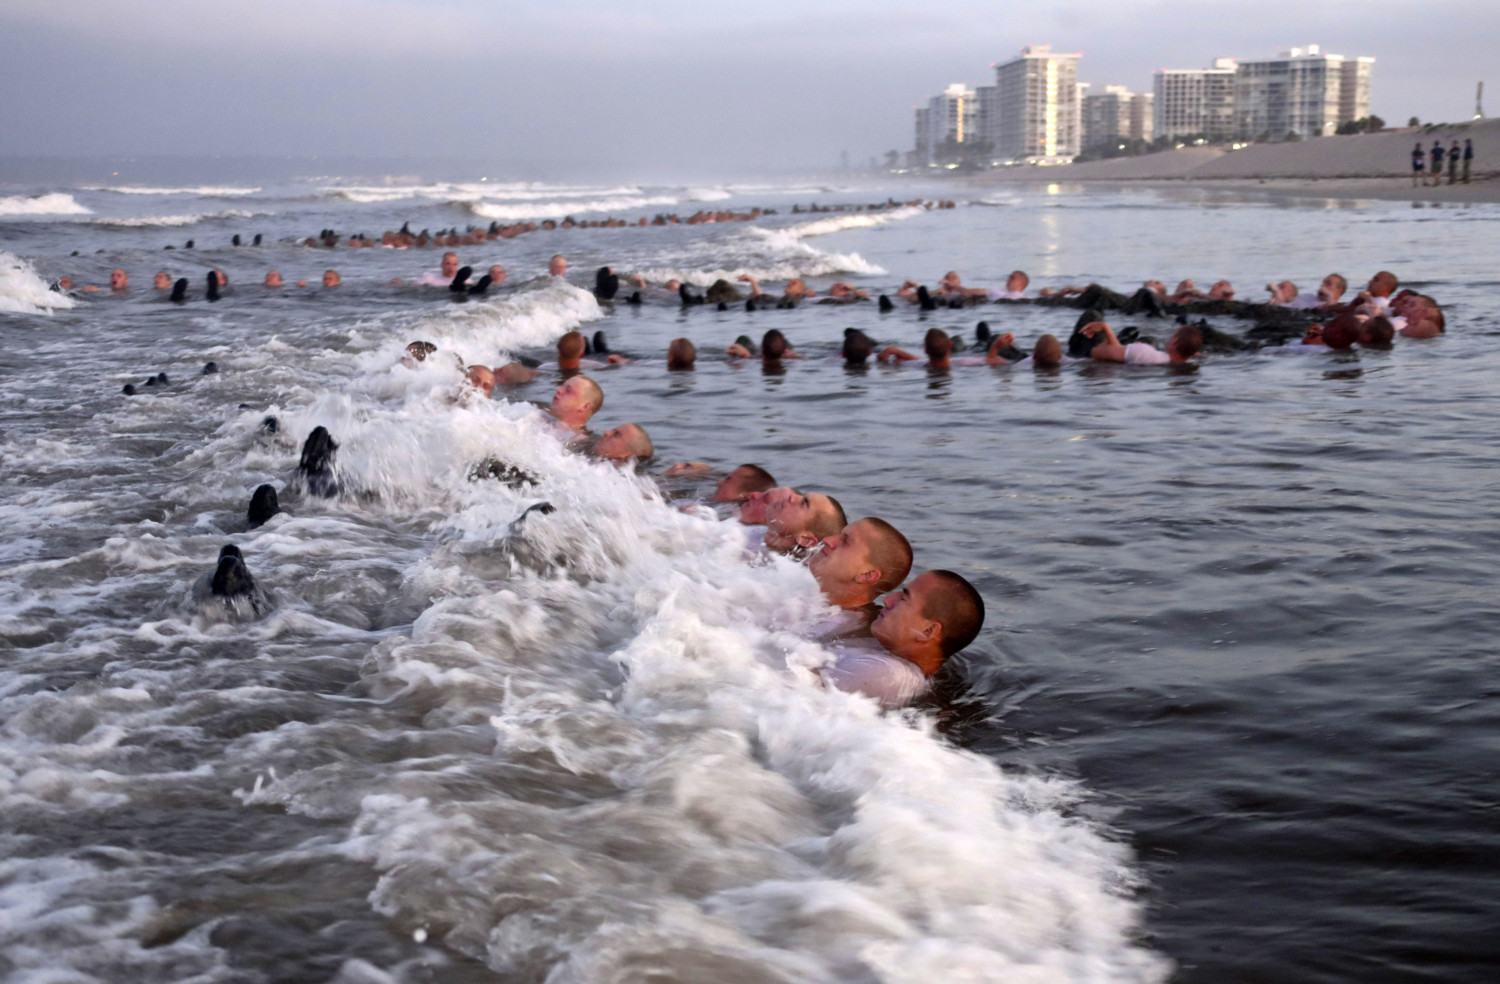 SEAL candidates participating in "surf immersion"